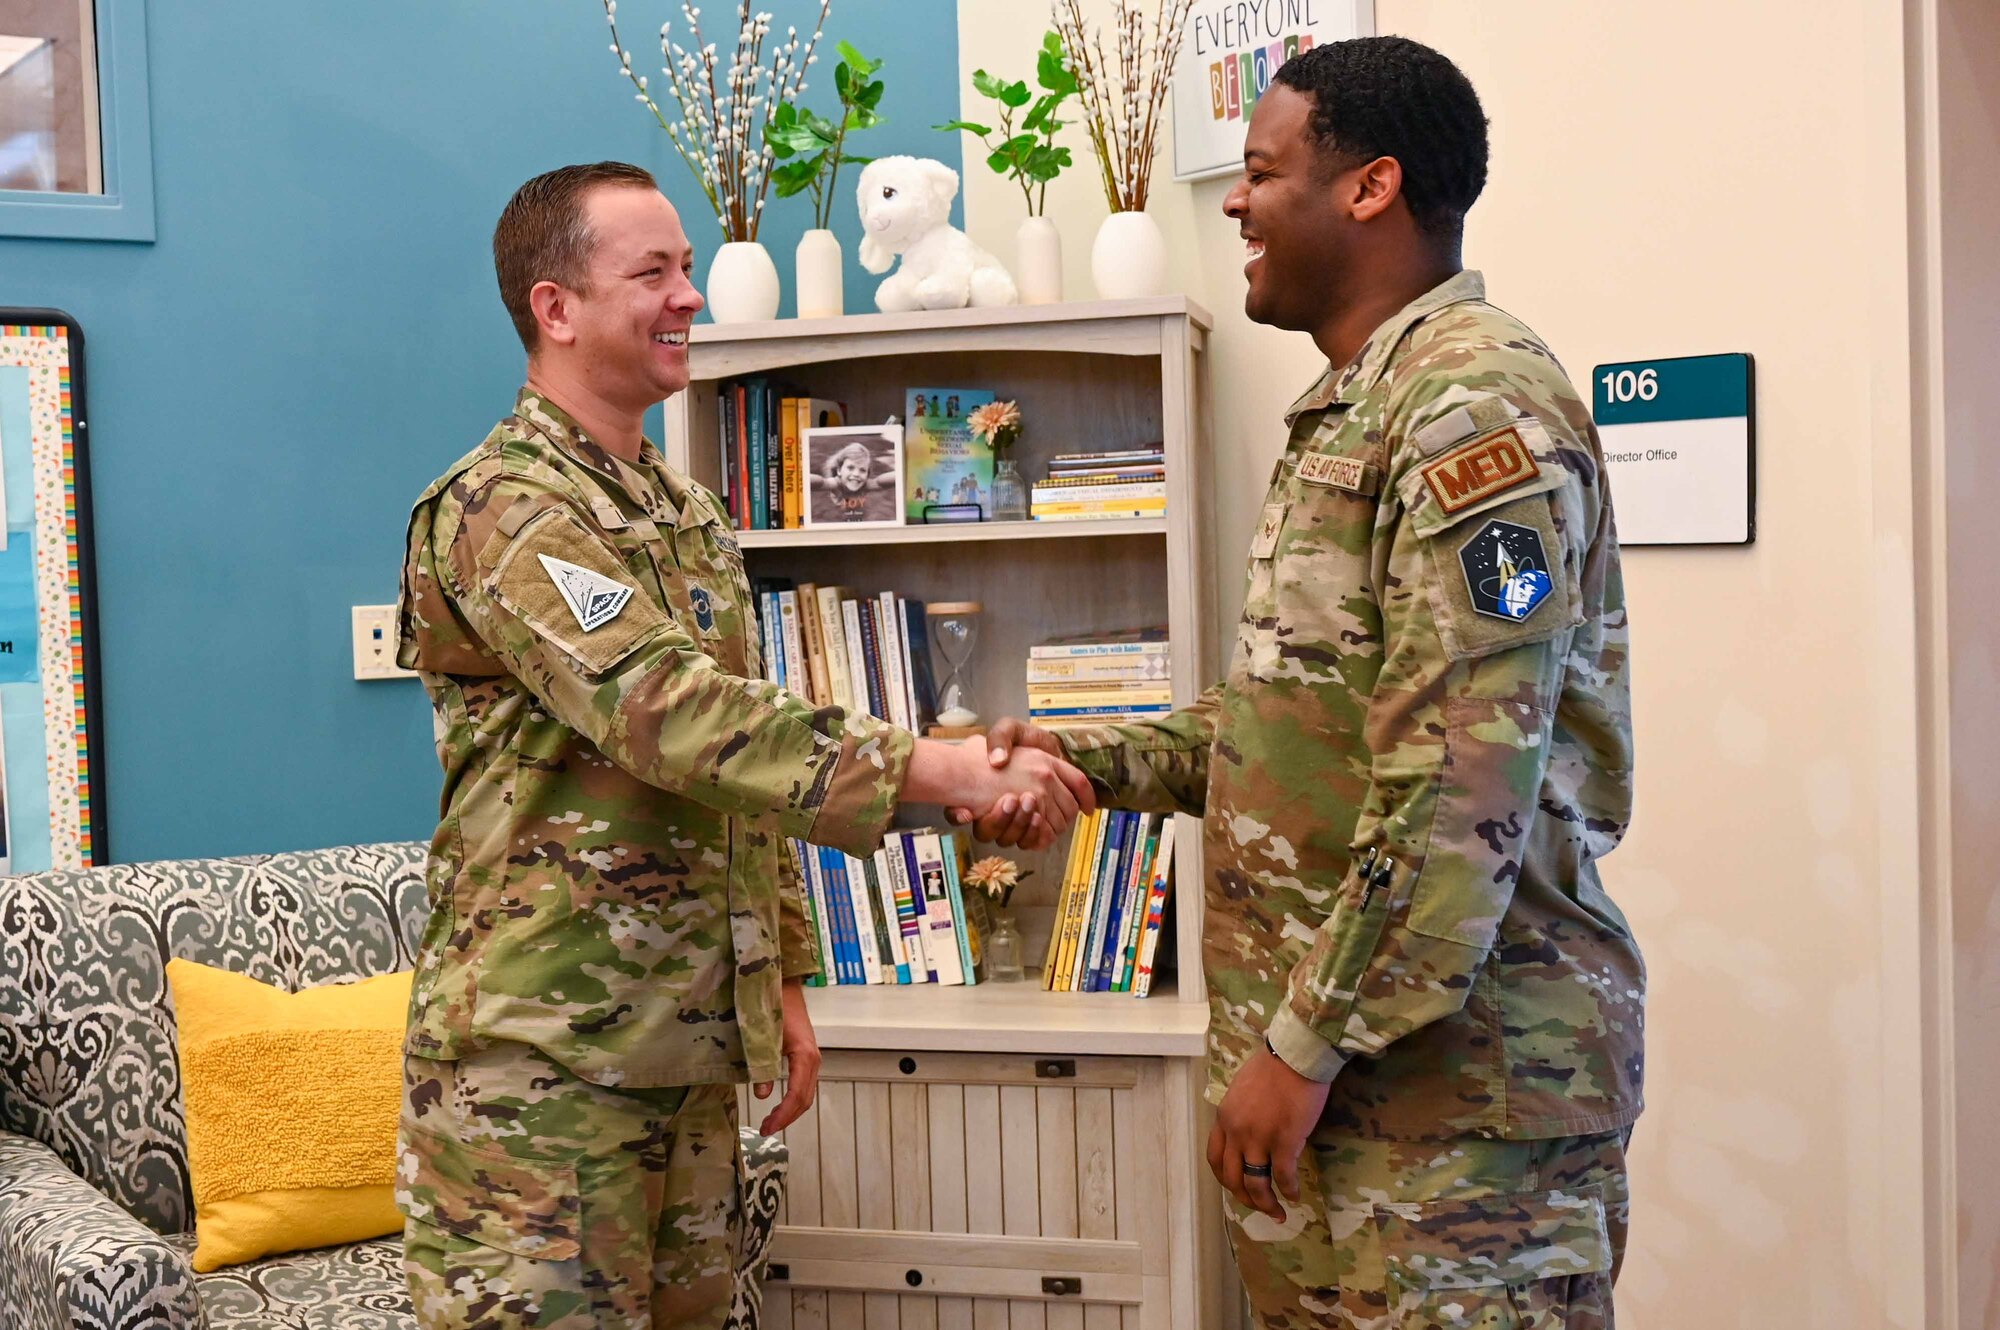 CMSgt Lloyd shakes hands with SrA Berry